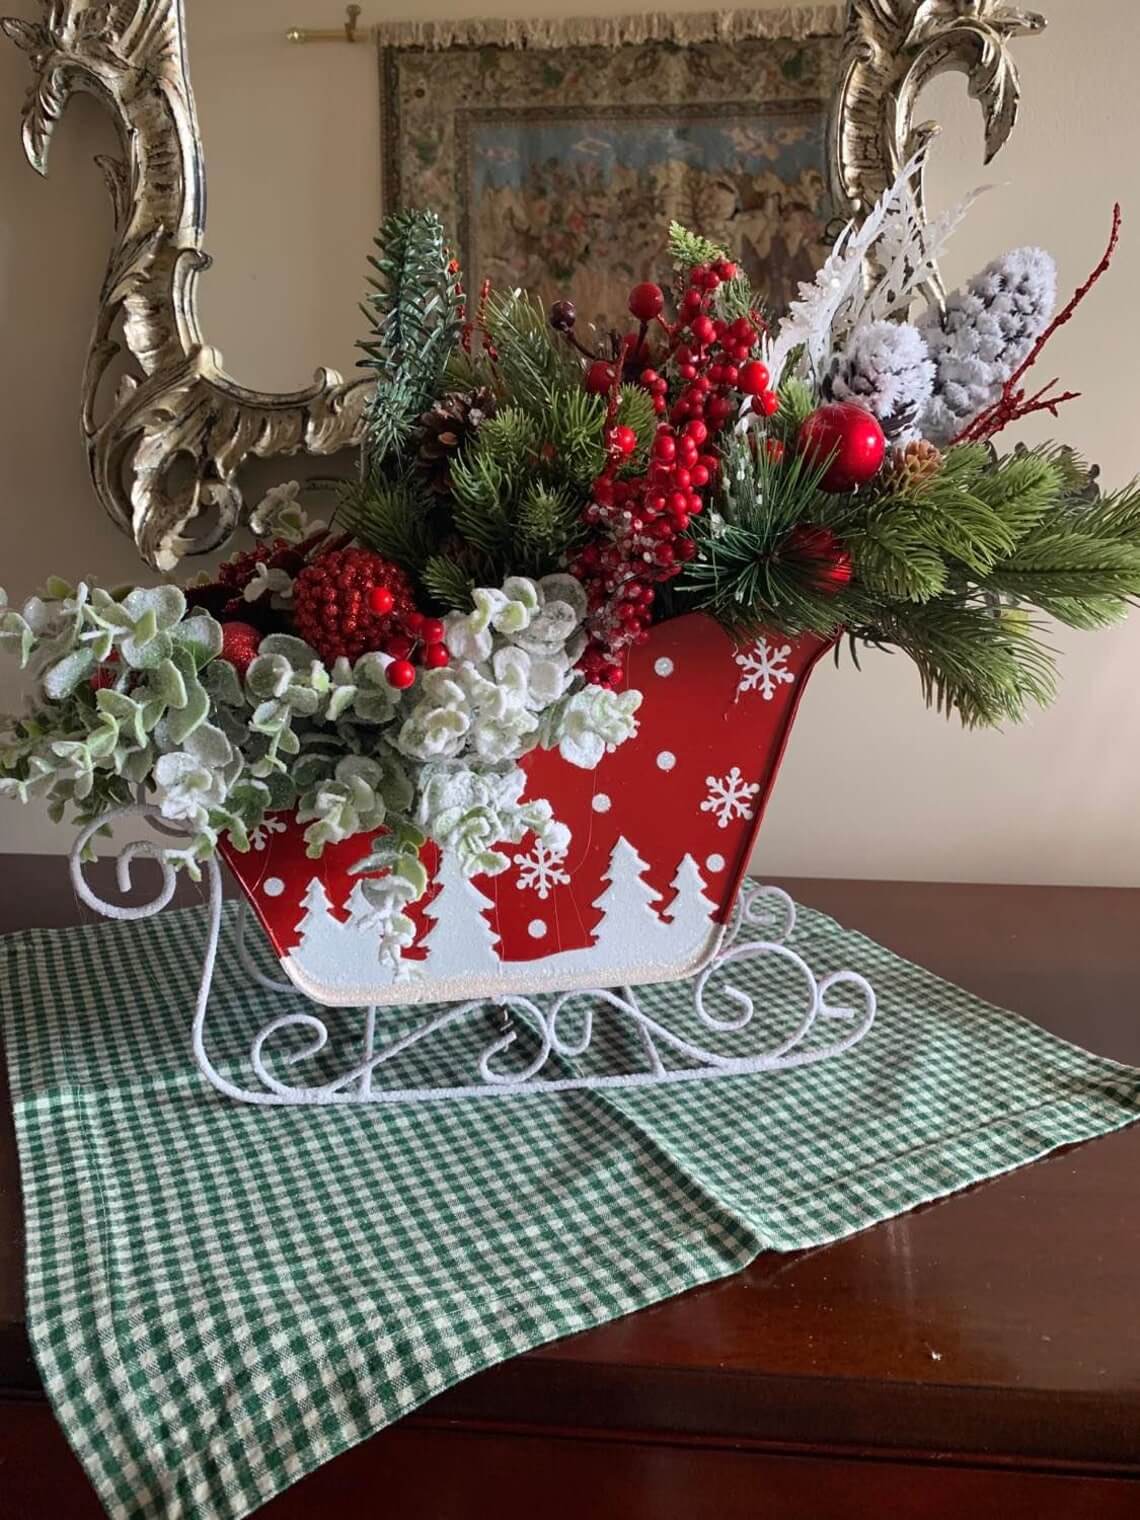 Santa's Sleigh Red and White Christmas Centerpiece